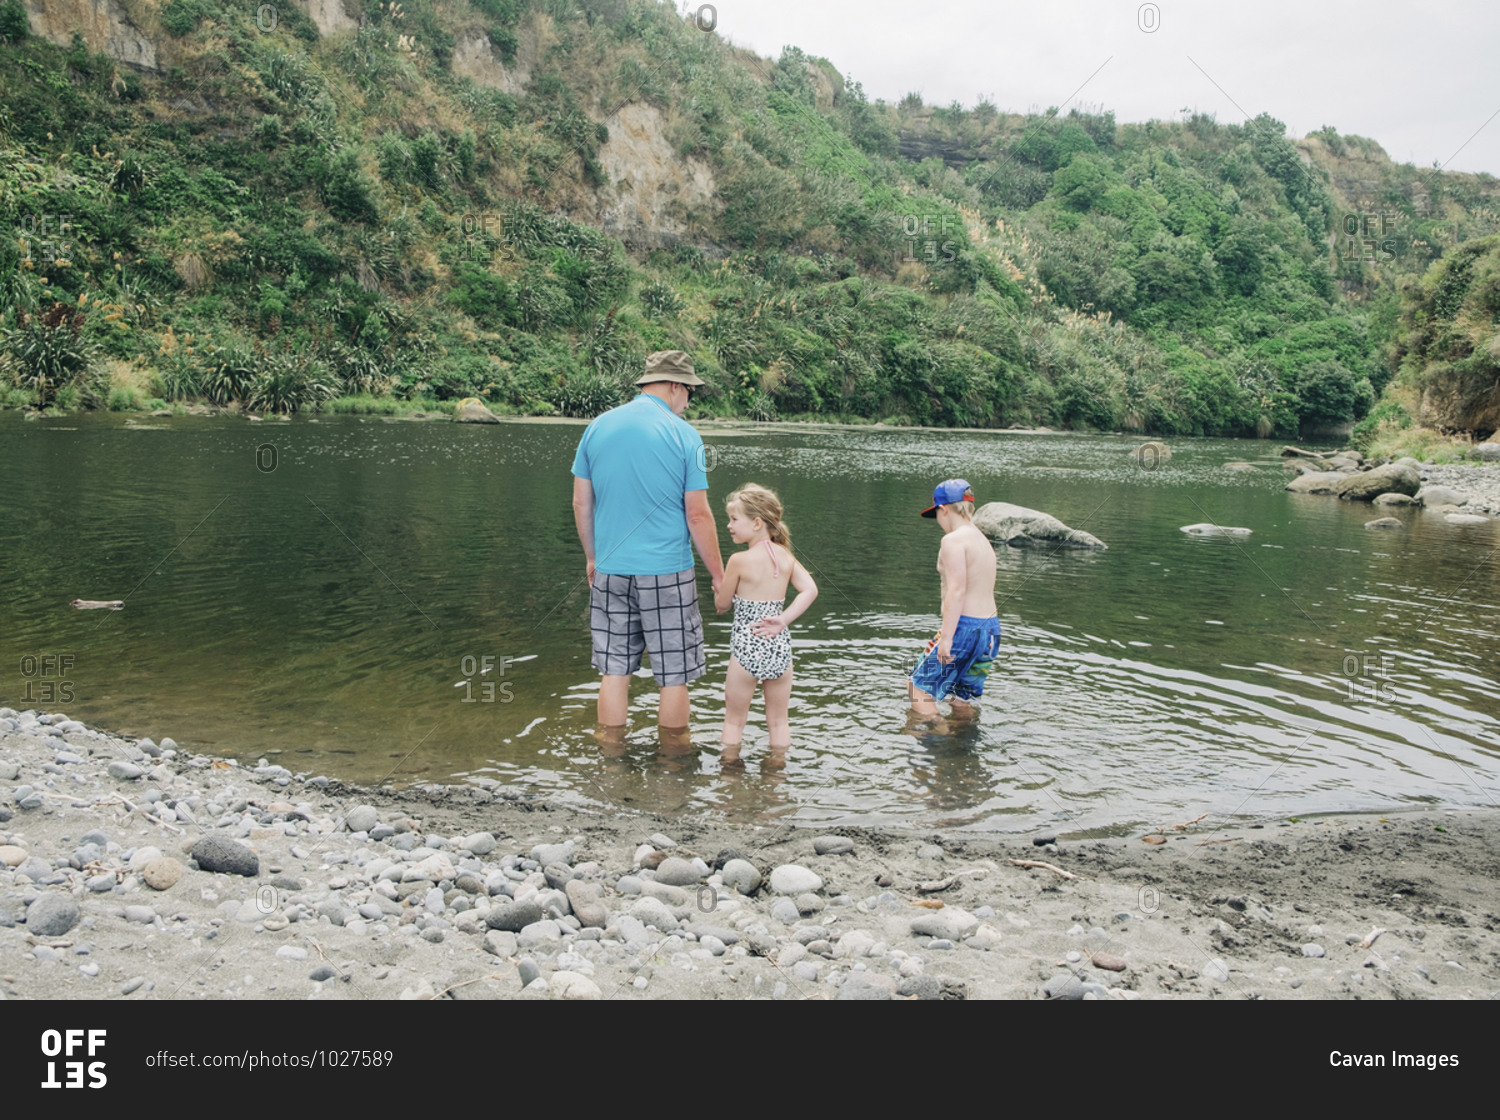 Family playing in the water at a scenic river spot